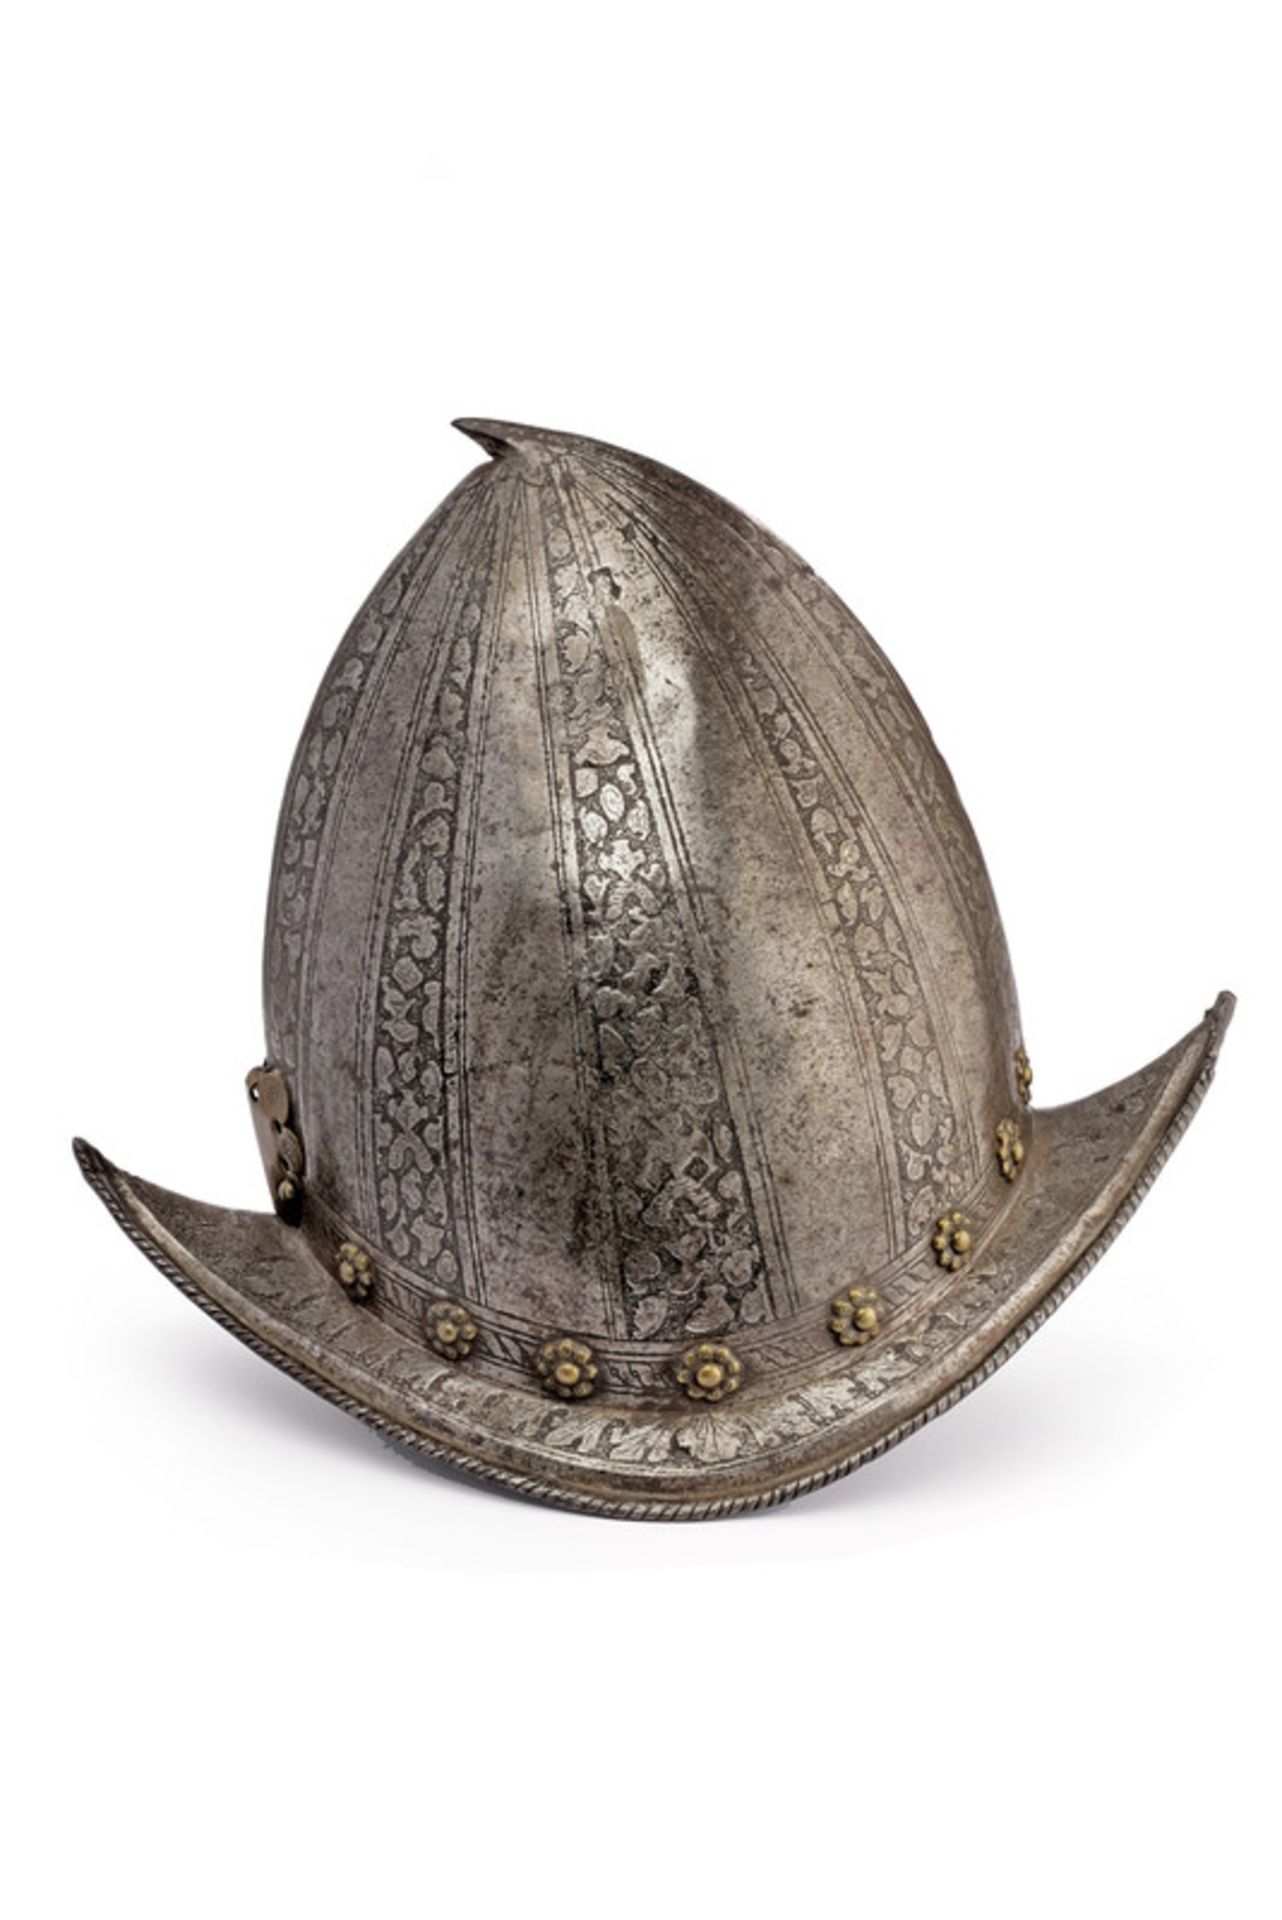 A cabasset morion etched in Pisan style - Image 2 of 3